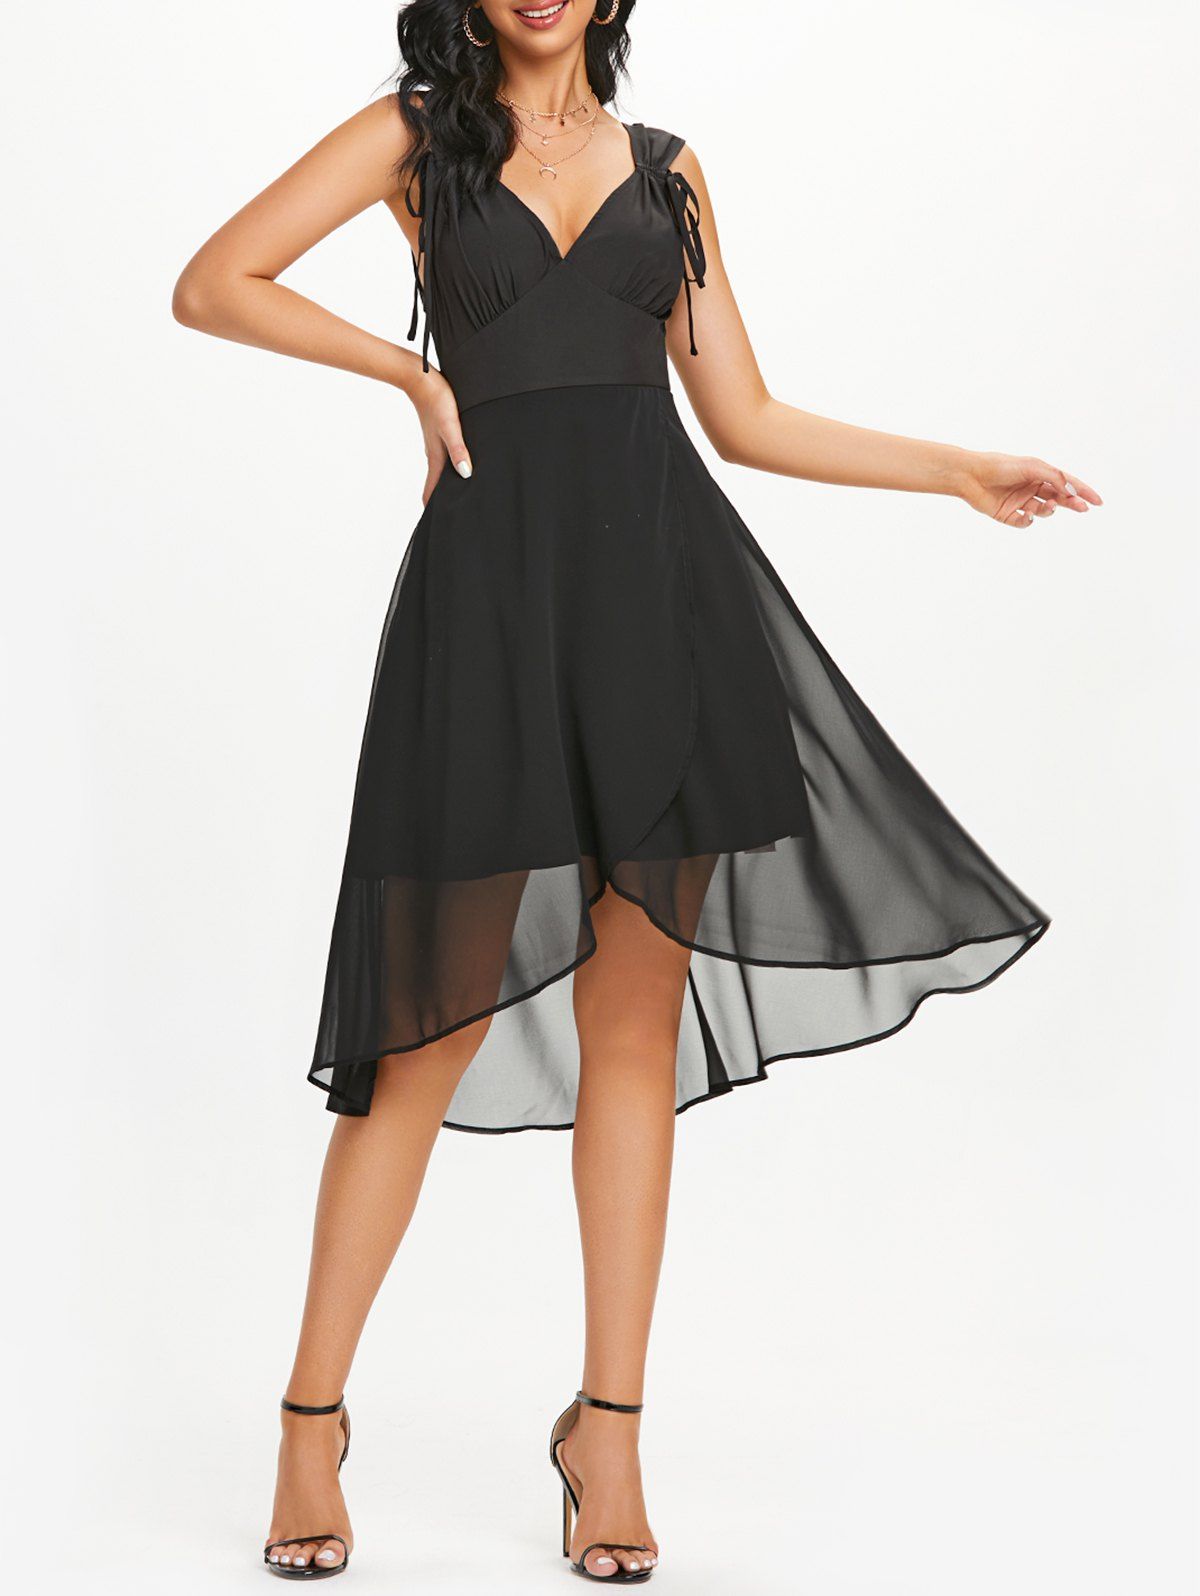 Plunging Neck Ruched Bust Chiffon Dress - BLACK L